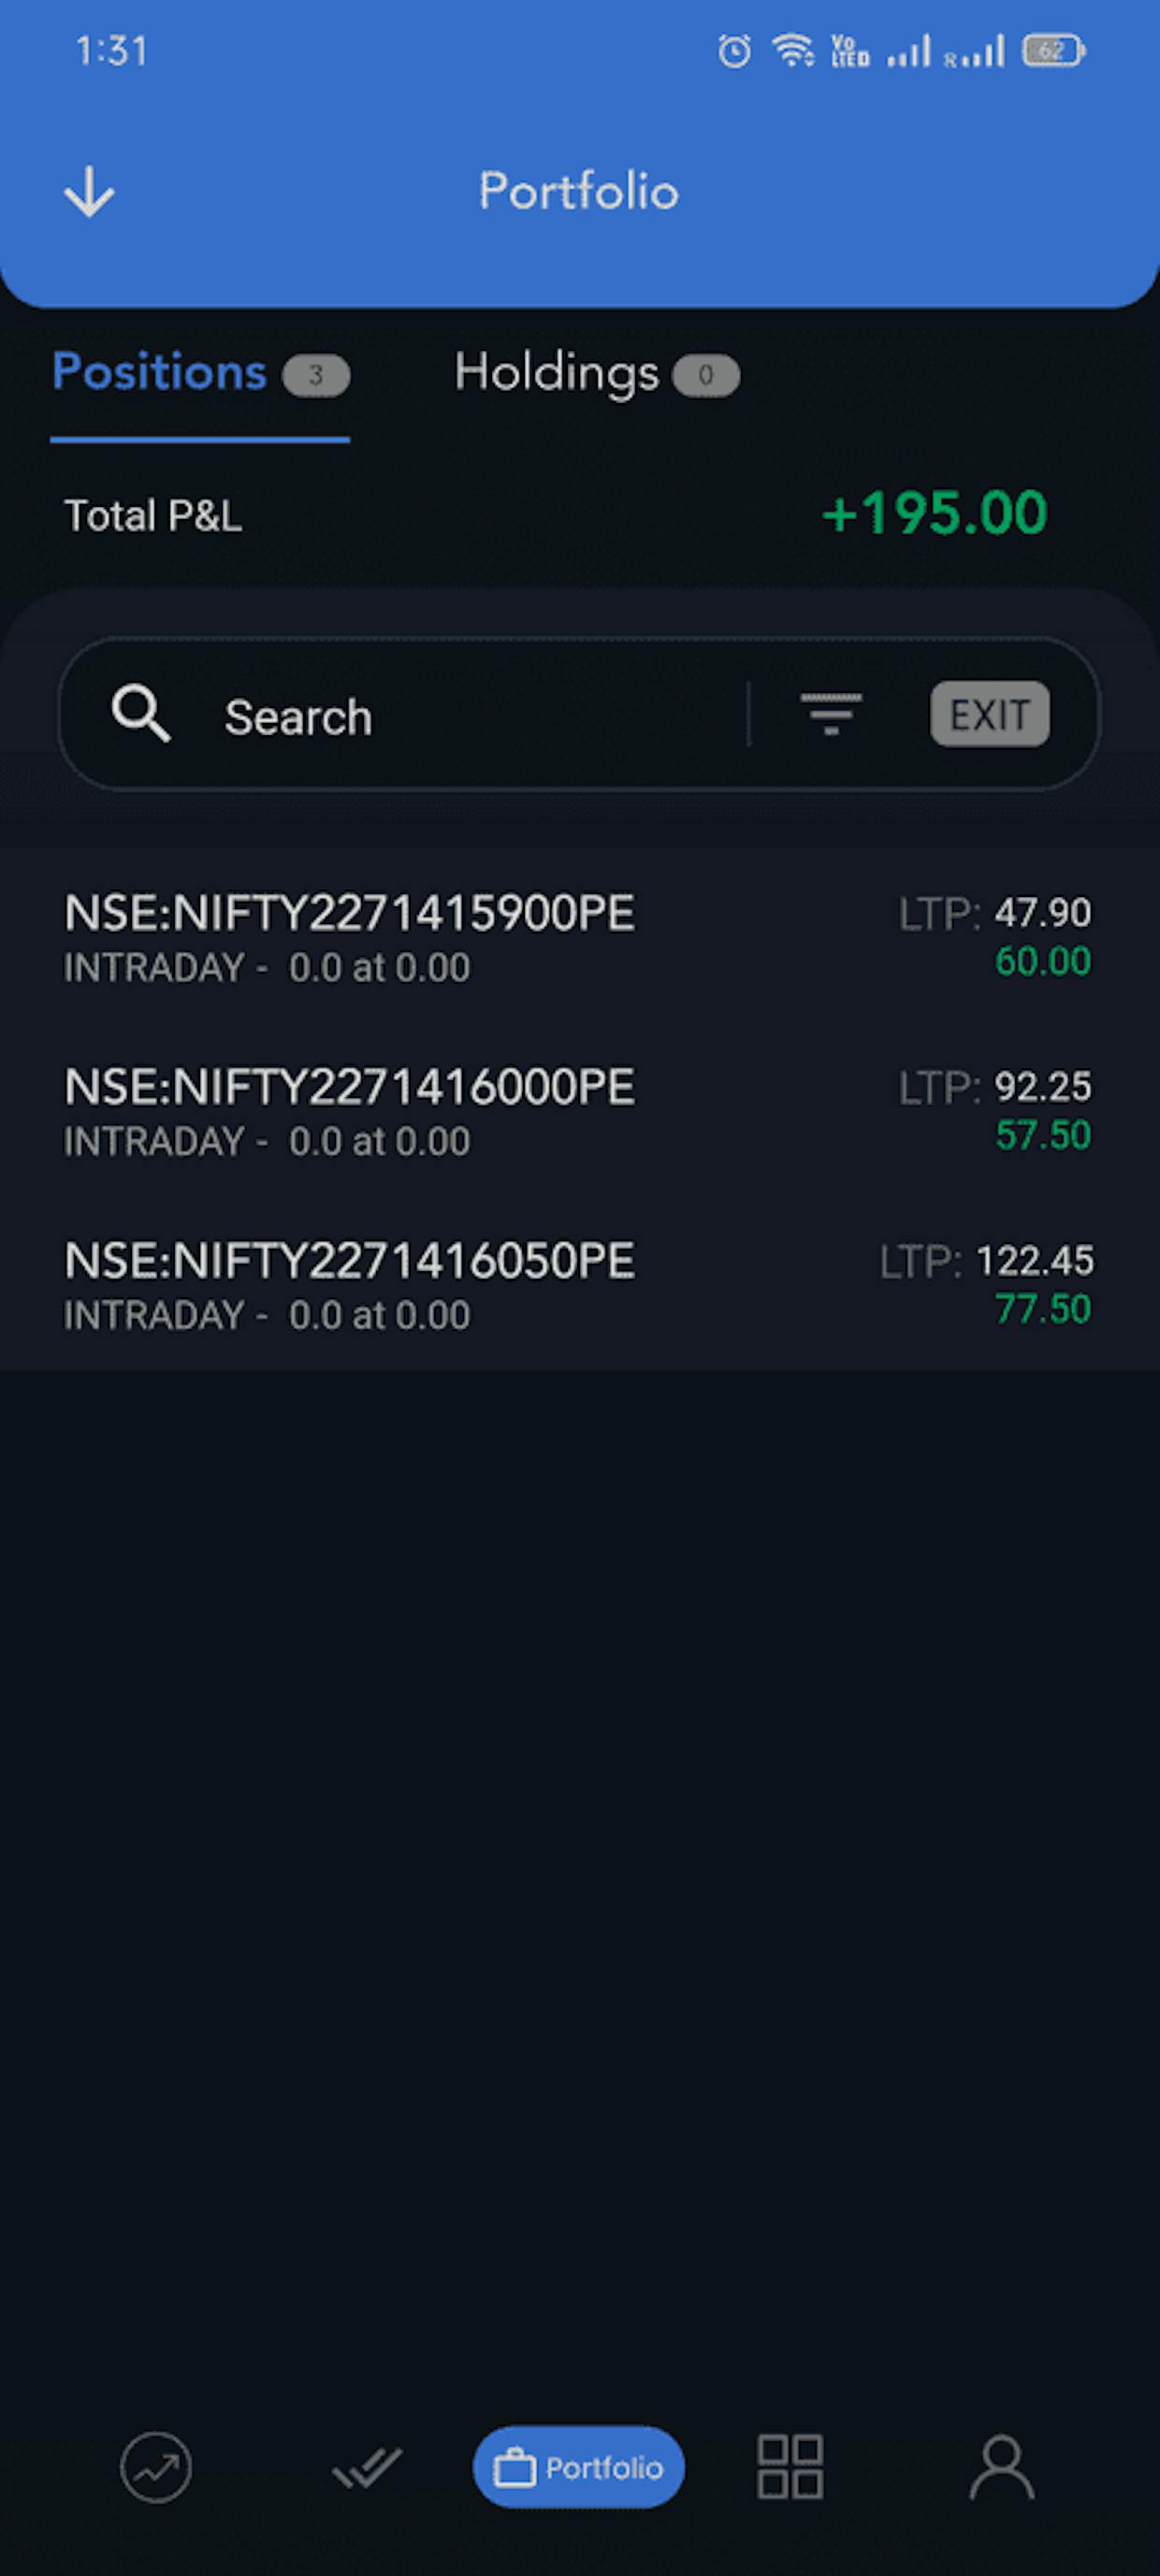 Dear All, Yesterday i was traded 4 time in options, Fyers mentioned 20/trade for options.But. At the end there are debit my account 400 amount.. Here mentioned 400 brokage charges only...No more further details... Could you help some one ..how fyers take charge for options trading 1 or more then a times per day...How are they took 400 charge... I don't understand.... please explain any one...I trade 4 time buy and sell...nifty and bank nifty....What are the charges 